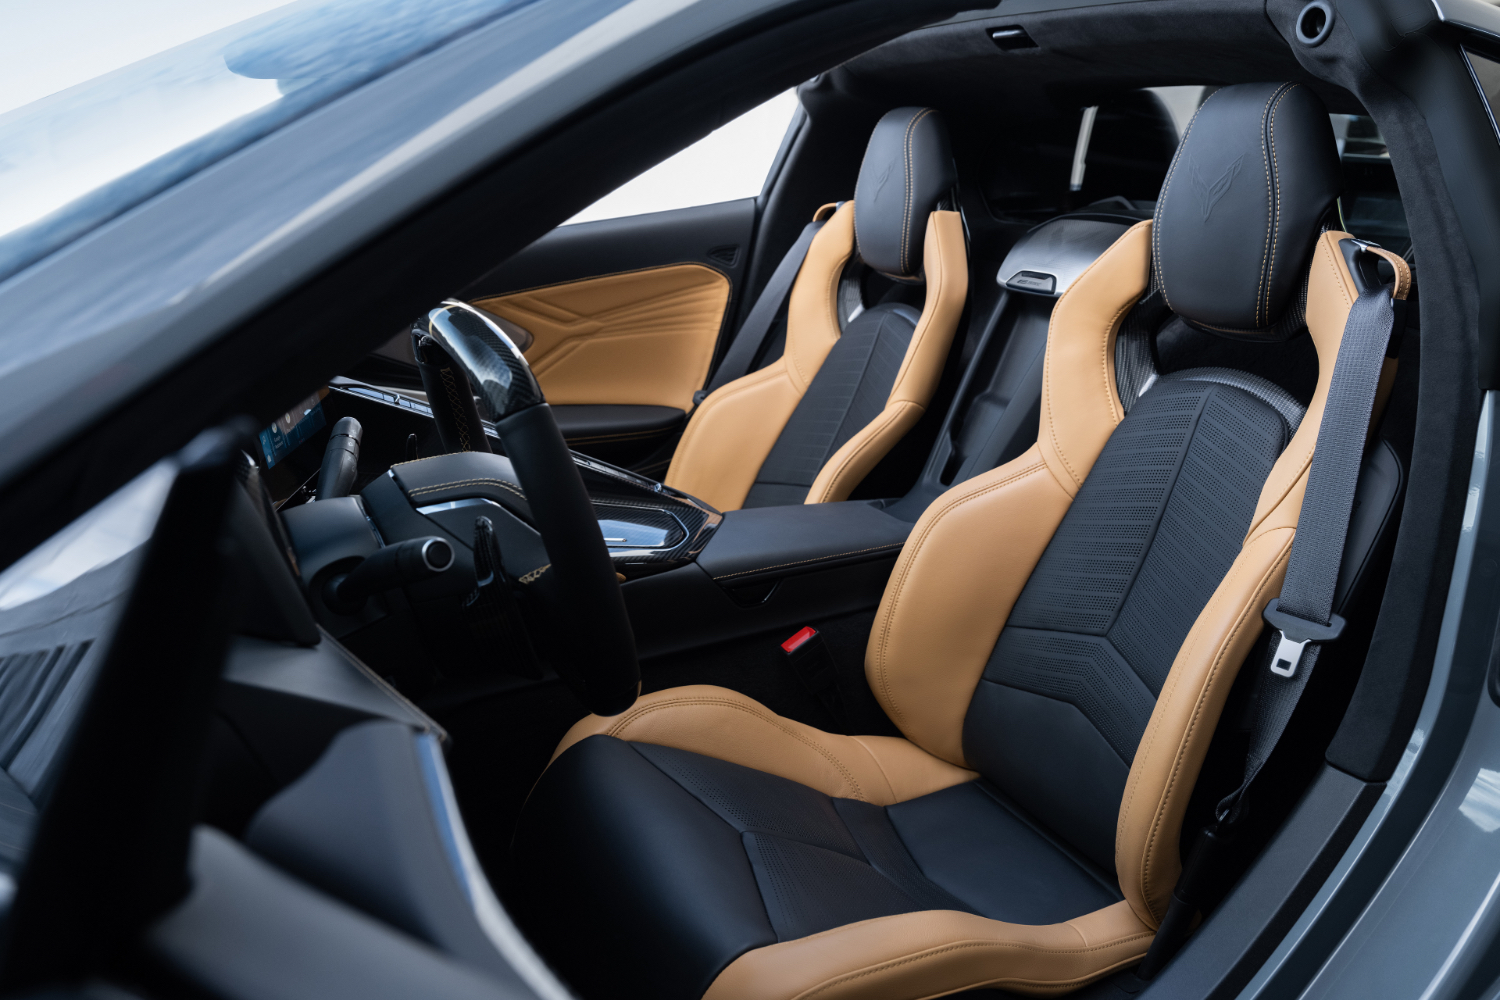 Seats in the 2024 Chevrolet Corvette E-Ray from outside the vehicle with driver's door open.